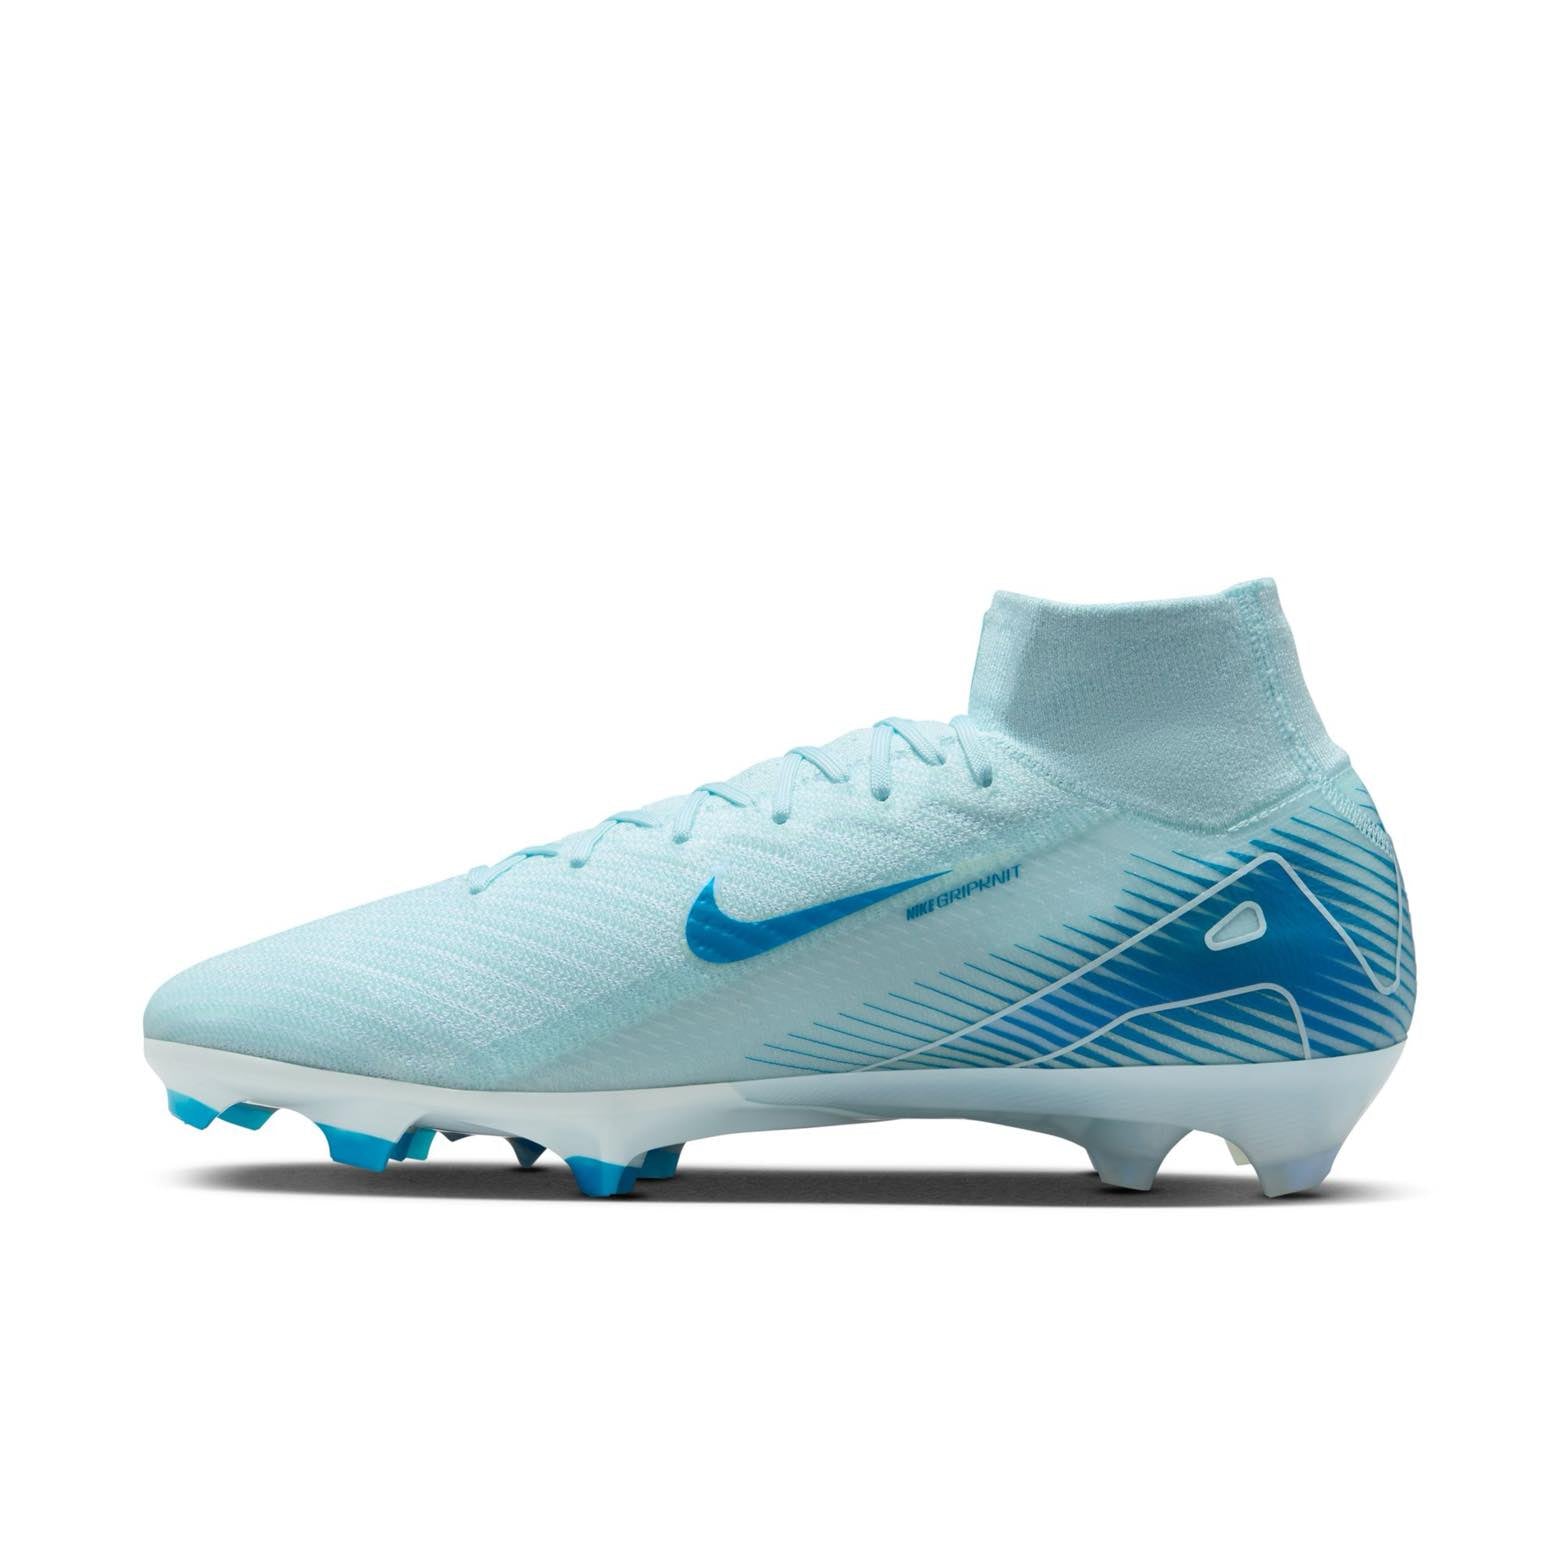 Nike Mercurial Superfly 10 Elite FG for enhanced speed and control on firm-ground pitches